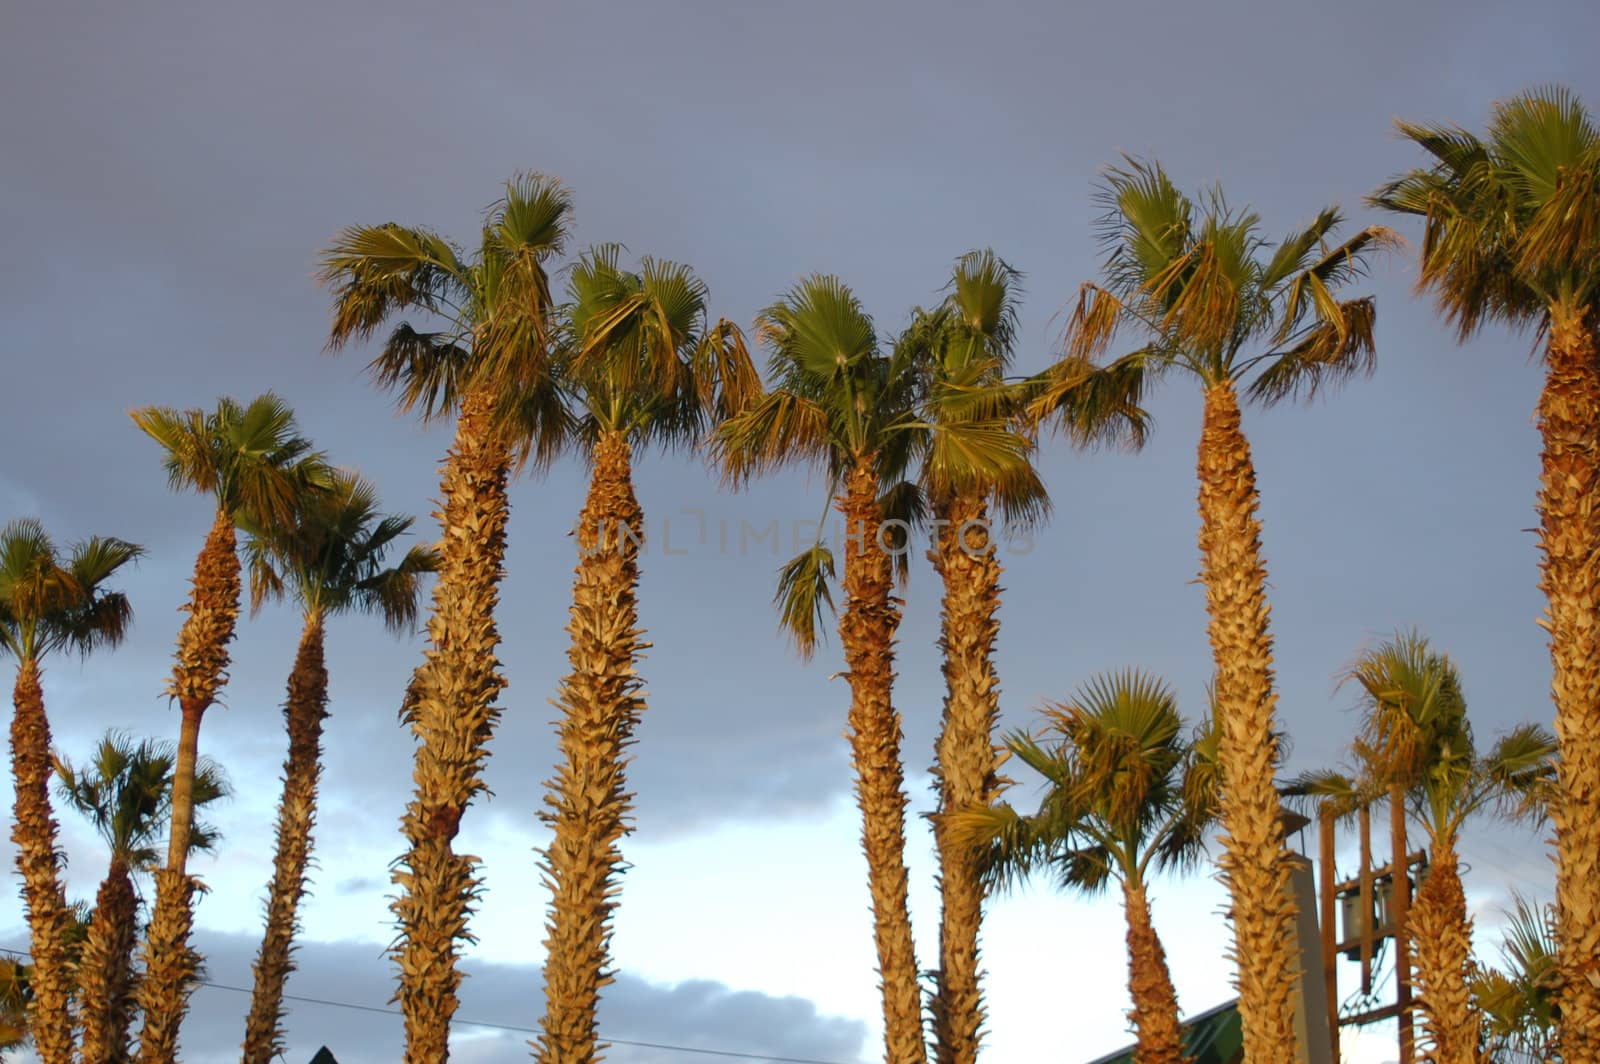 Row of desert palm trees against a blue sky between Los Angeles and Las Vegas